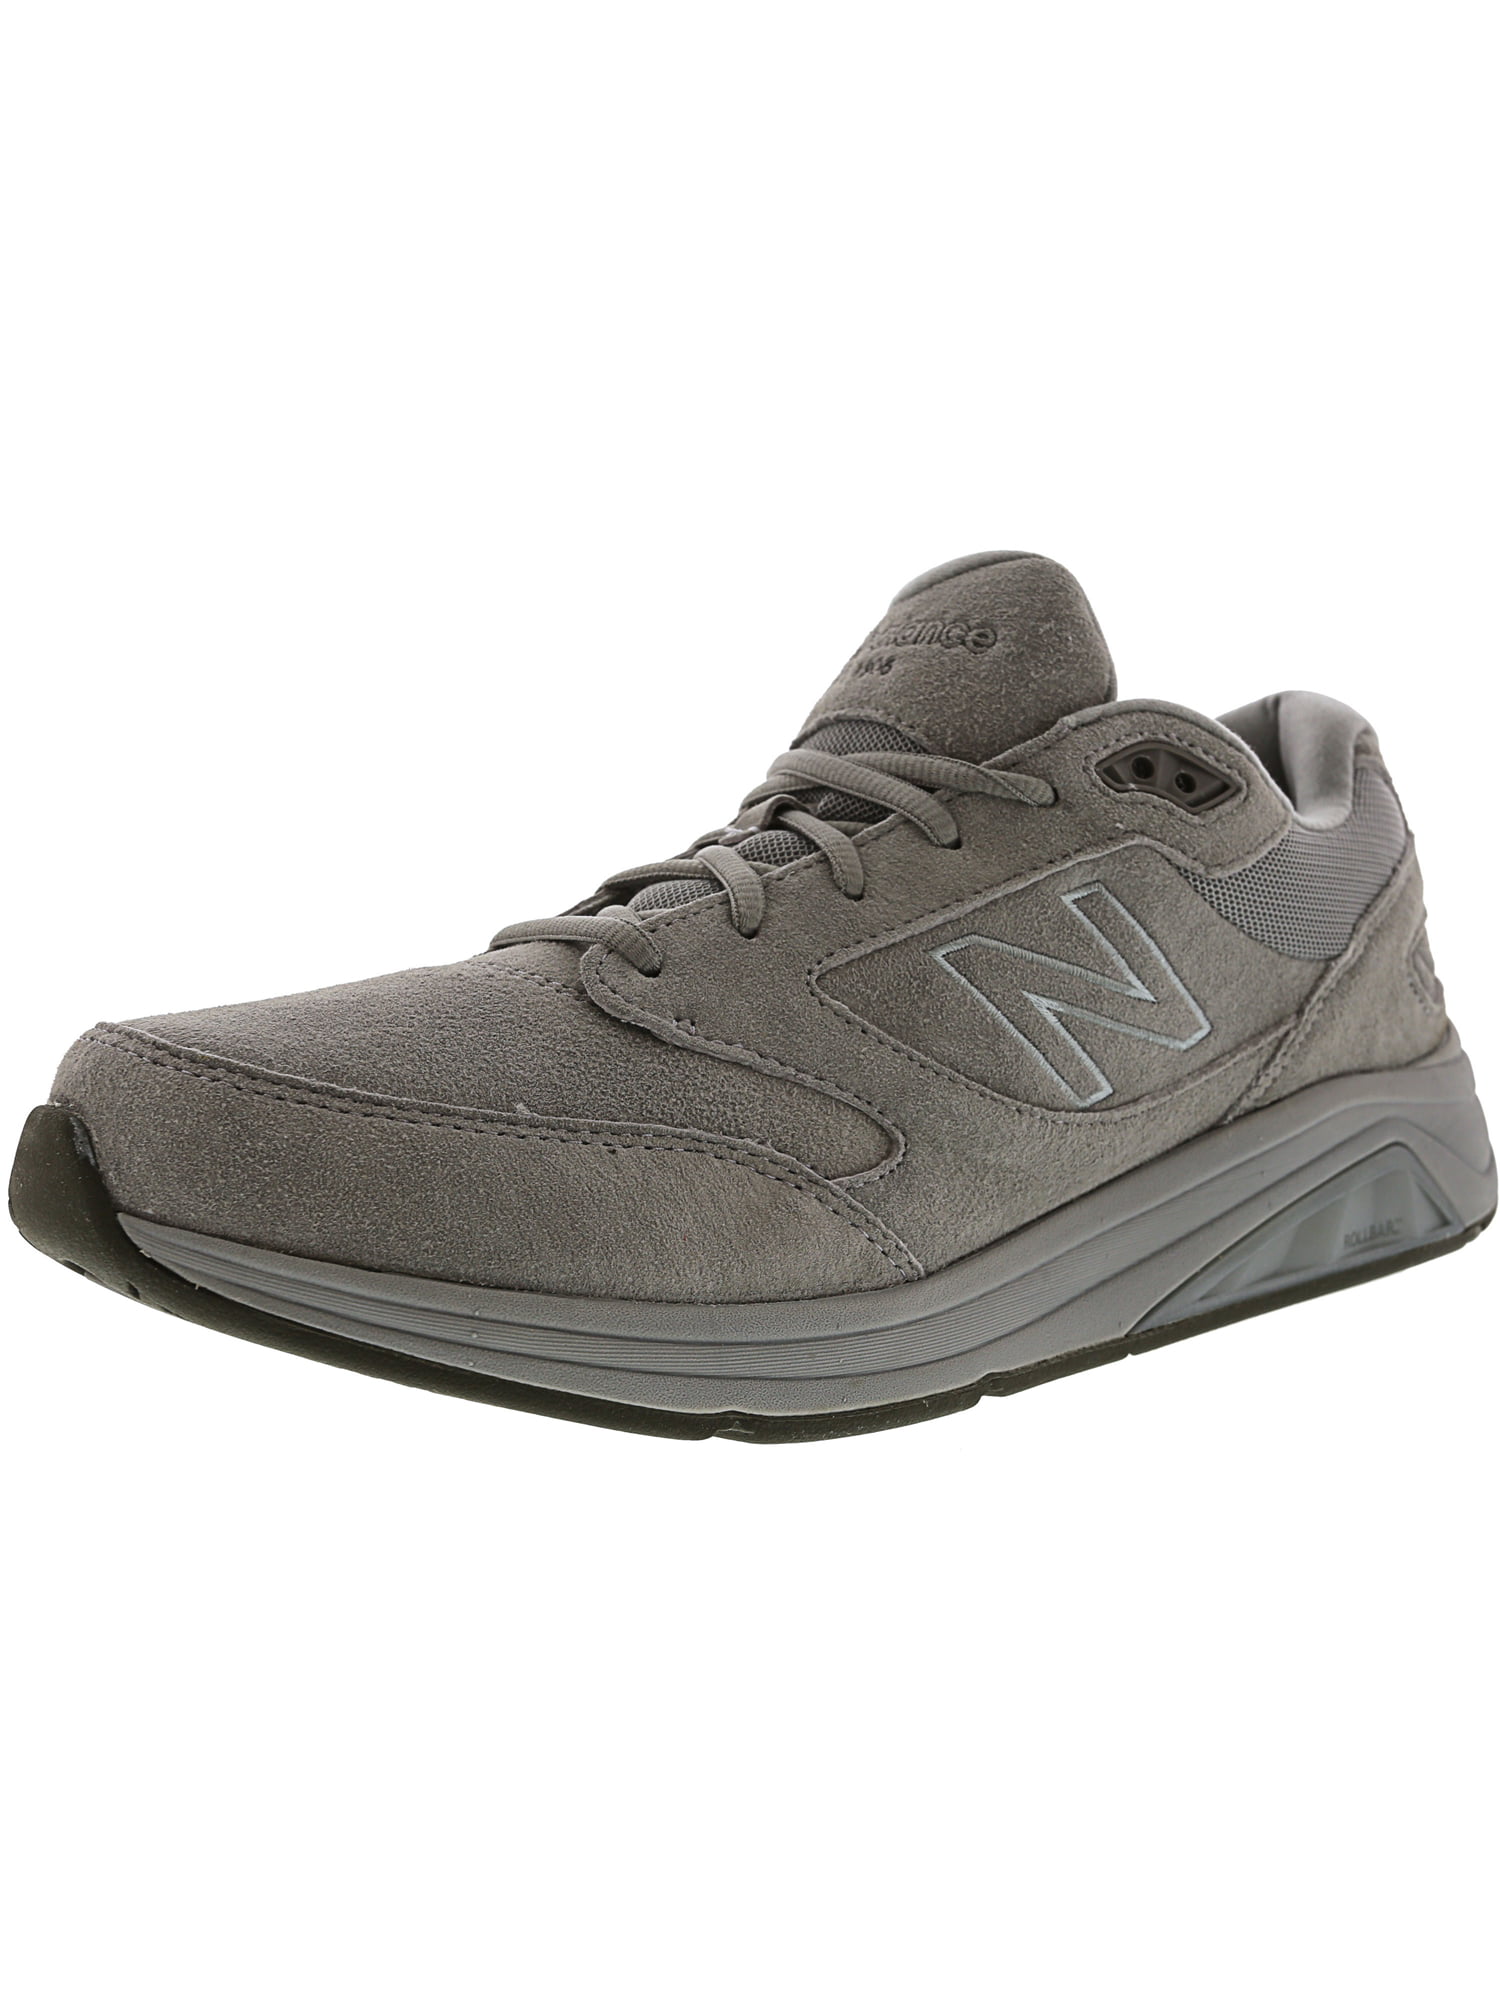 New Balance Men's Mw928 Gy3 Ankle-High 